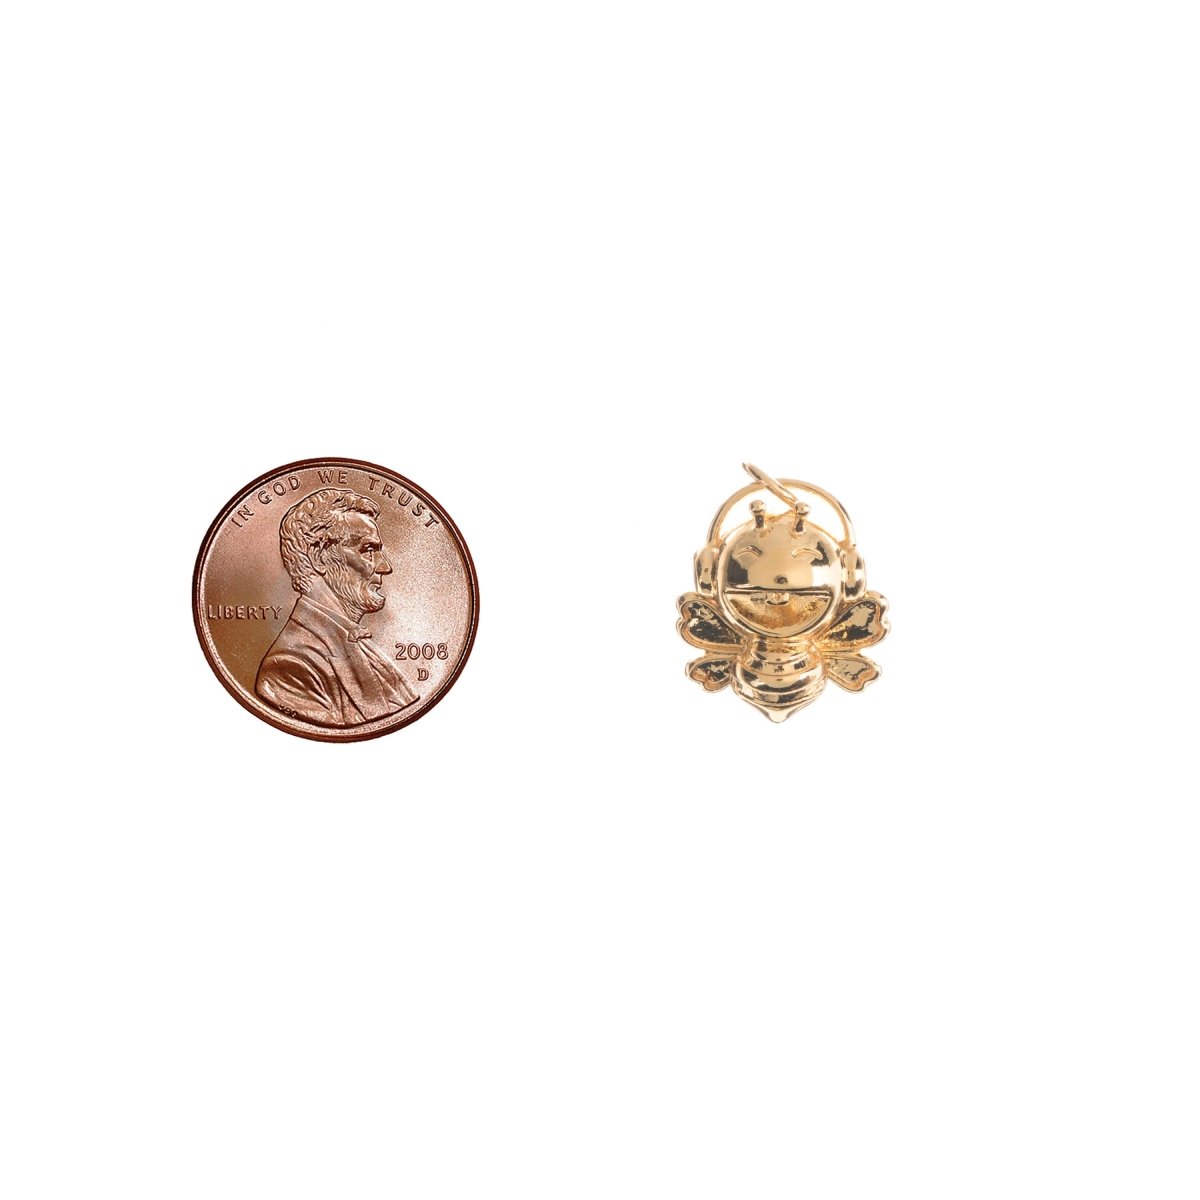 Teeny Tiny 18k Gold filled Bee Charm, Dainty Queen Bee Charm, Dainty Delicate Bee Pendant Jewelry, CL-C-222 - DLUXCA